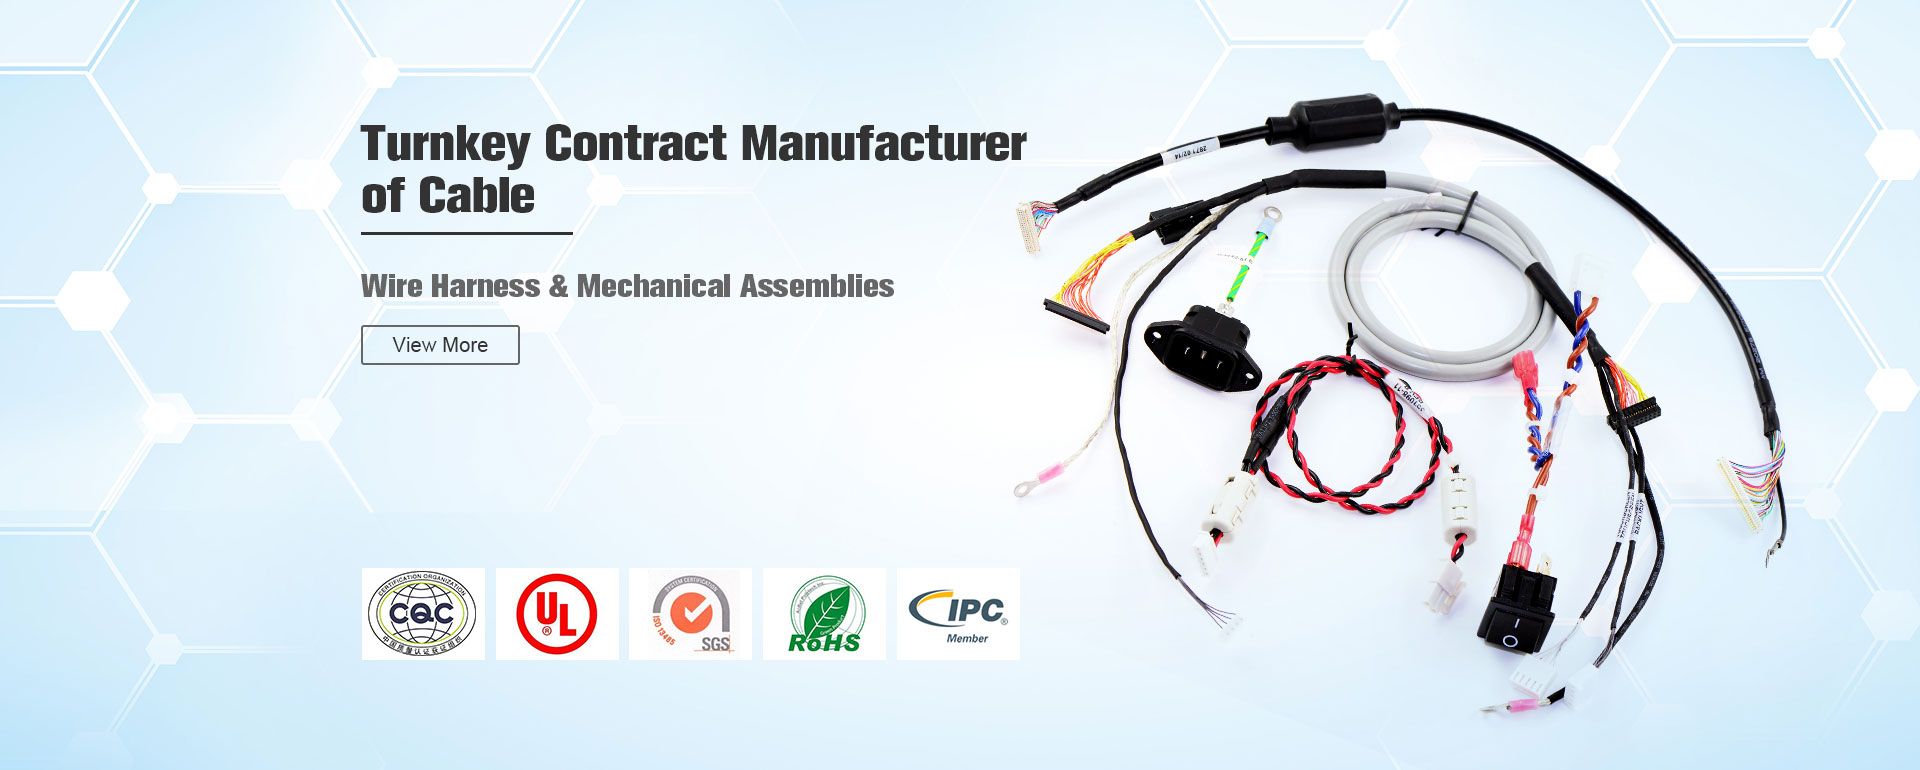 Turnkey Contract Manufacturer of Cable